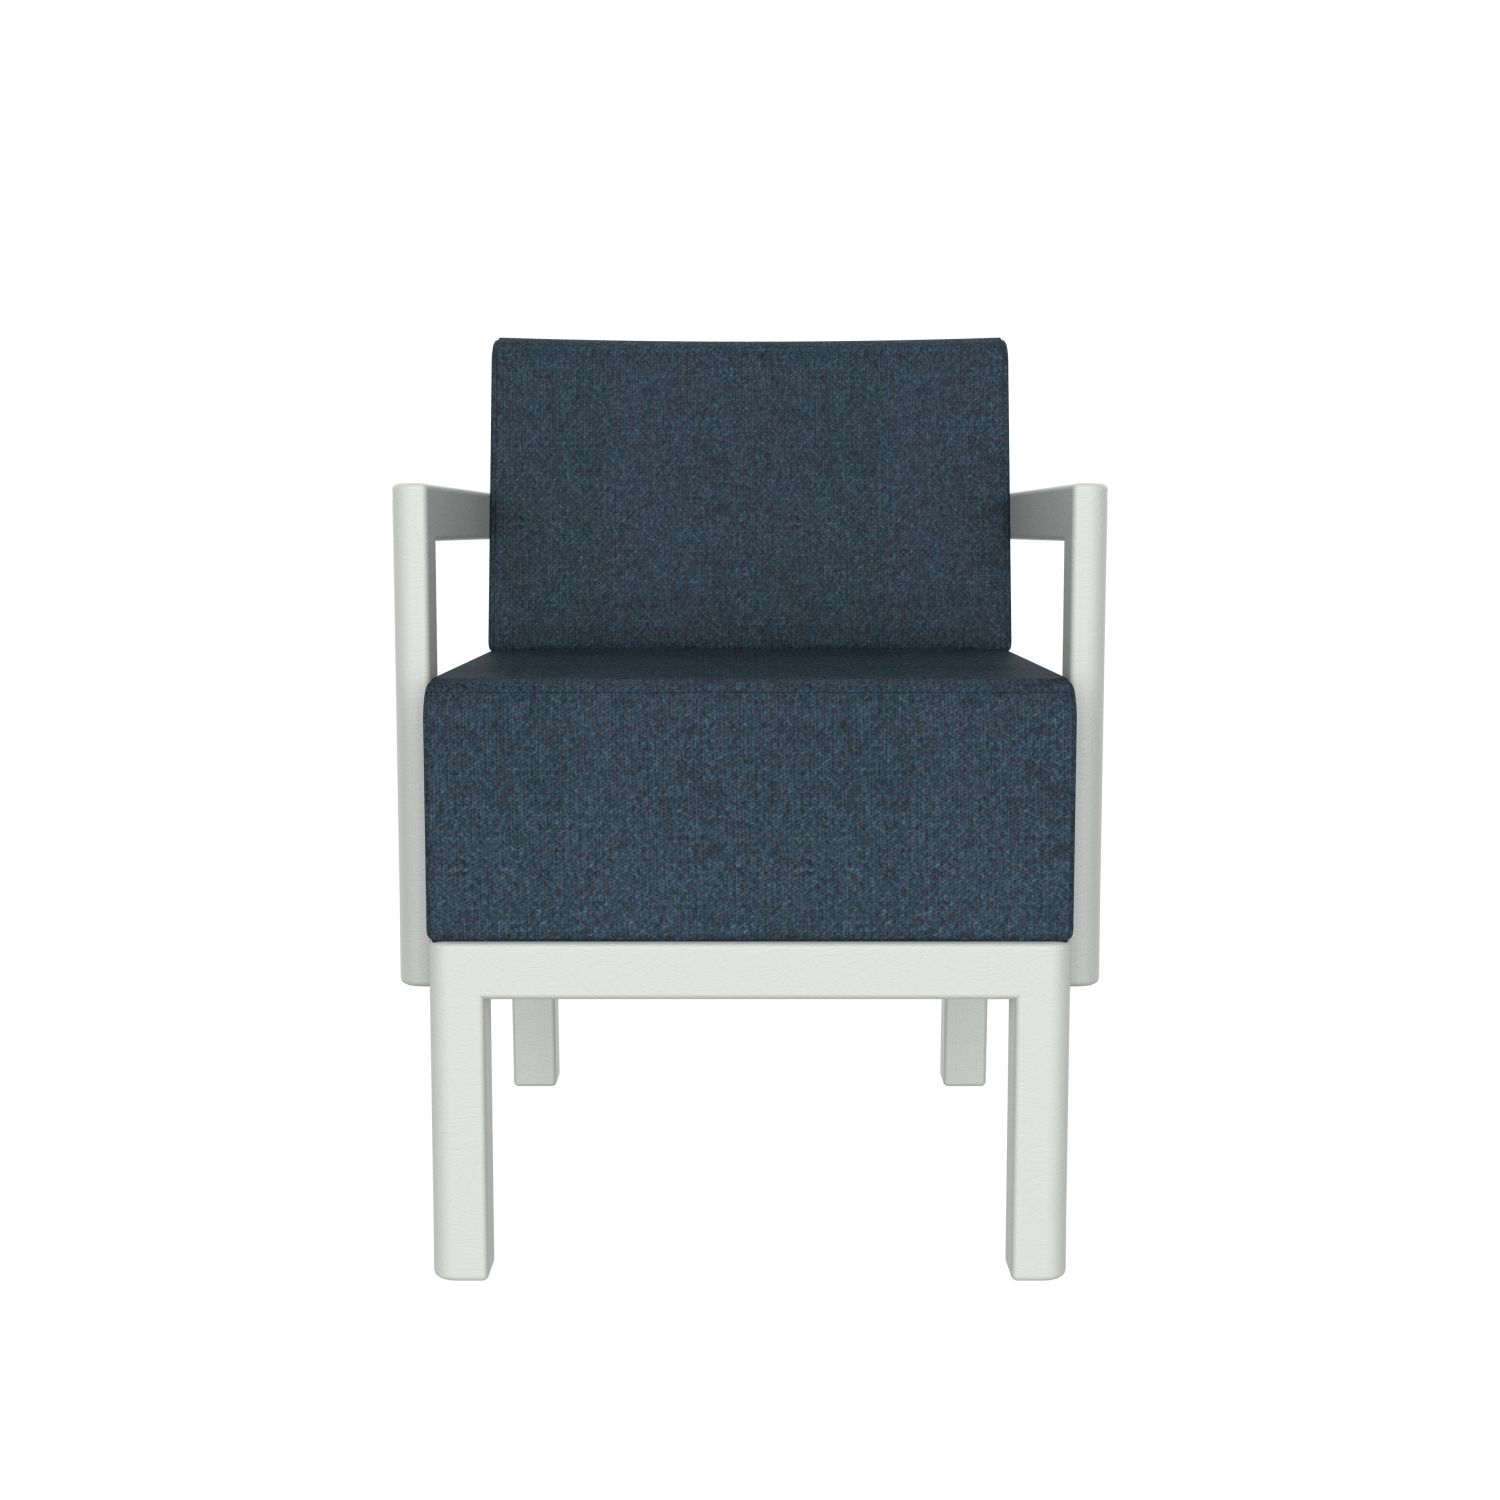 lensvelt piet boon chair 02 with armrests moss night blue 45 price level 2 light grey ral7035 hard leg ends